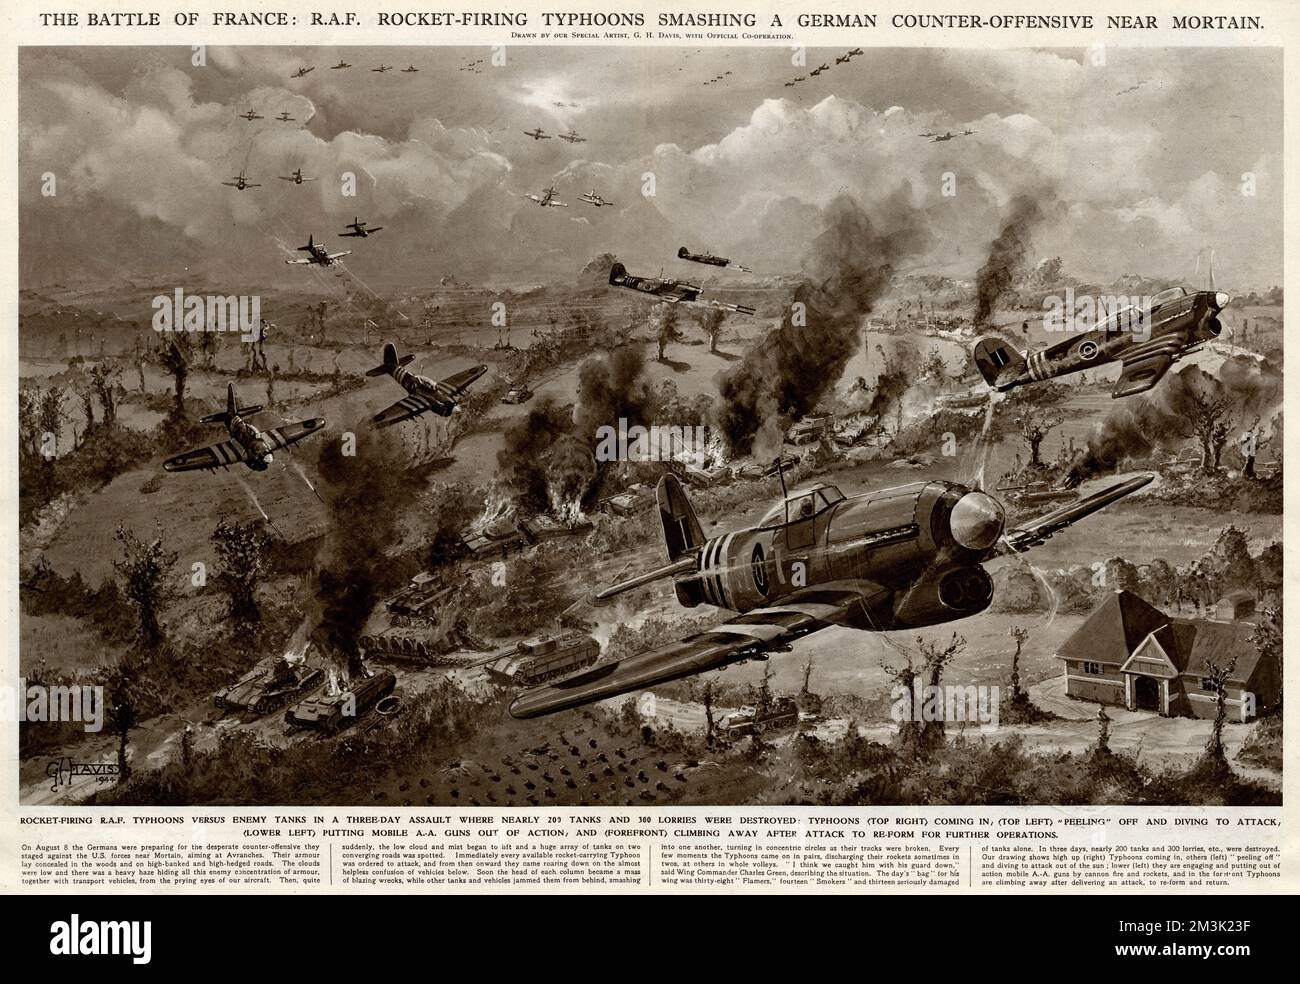 The Battle of France.  Royal Air Force Typhoons, fighter-bombers equipped with rockets, attacking a column of German tanks near Mortain, France, during the Second World War.  German tanks and armoured vehicles had been massing in this area for a large scale counter-attack on American positions and low cloud had concealed their intentions from the Allied air force.  However on 8 August, the clouds broke and two large German columns, consisting of several hundred vehicles, were seen and attacked by British aeroplanes.  1944 Stock Photo